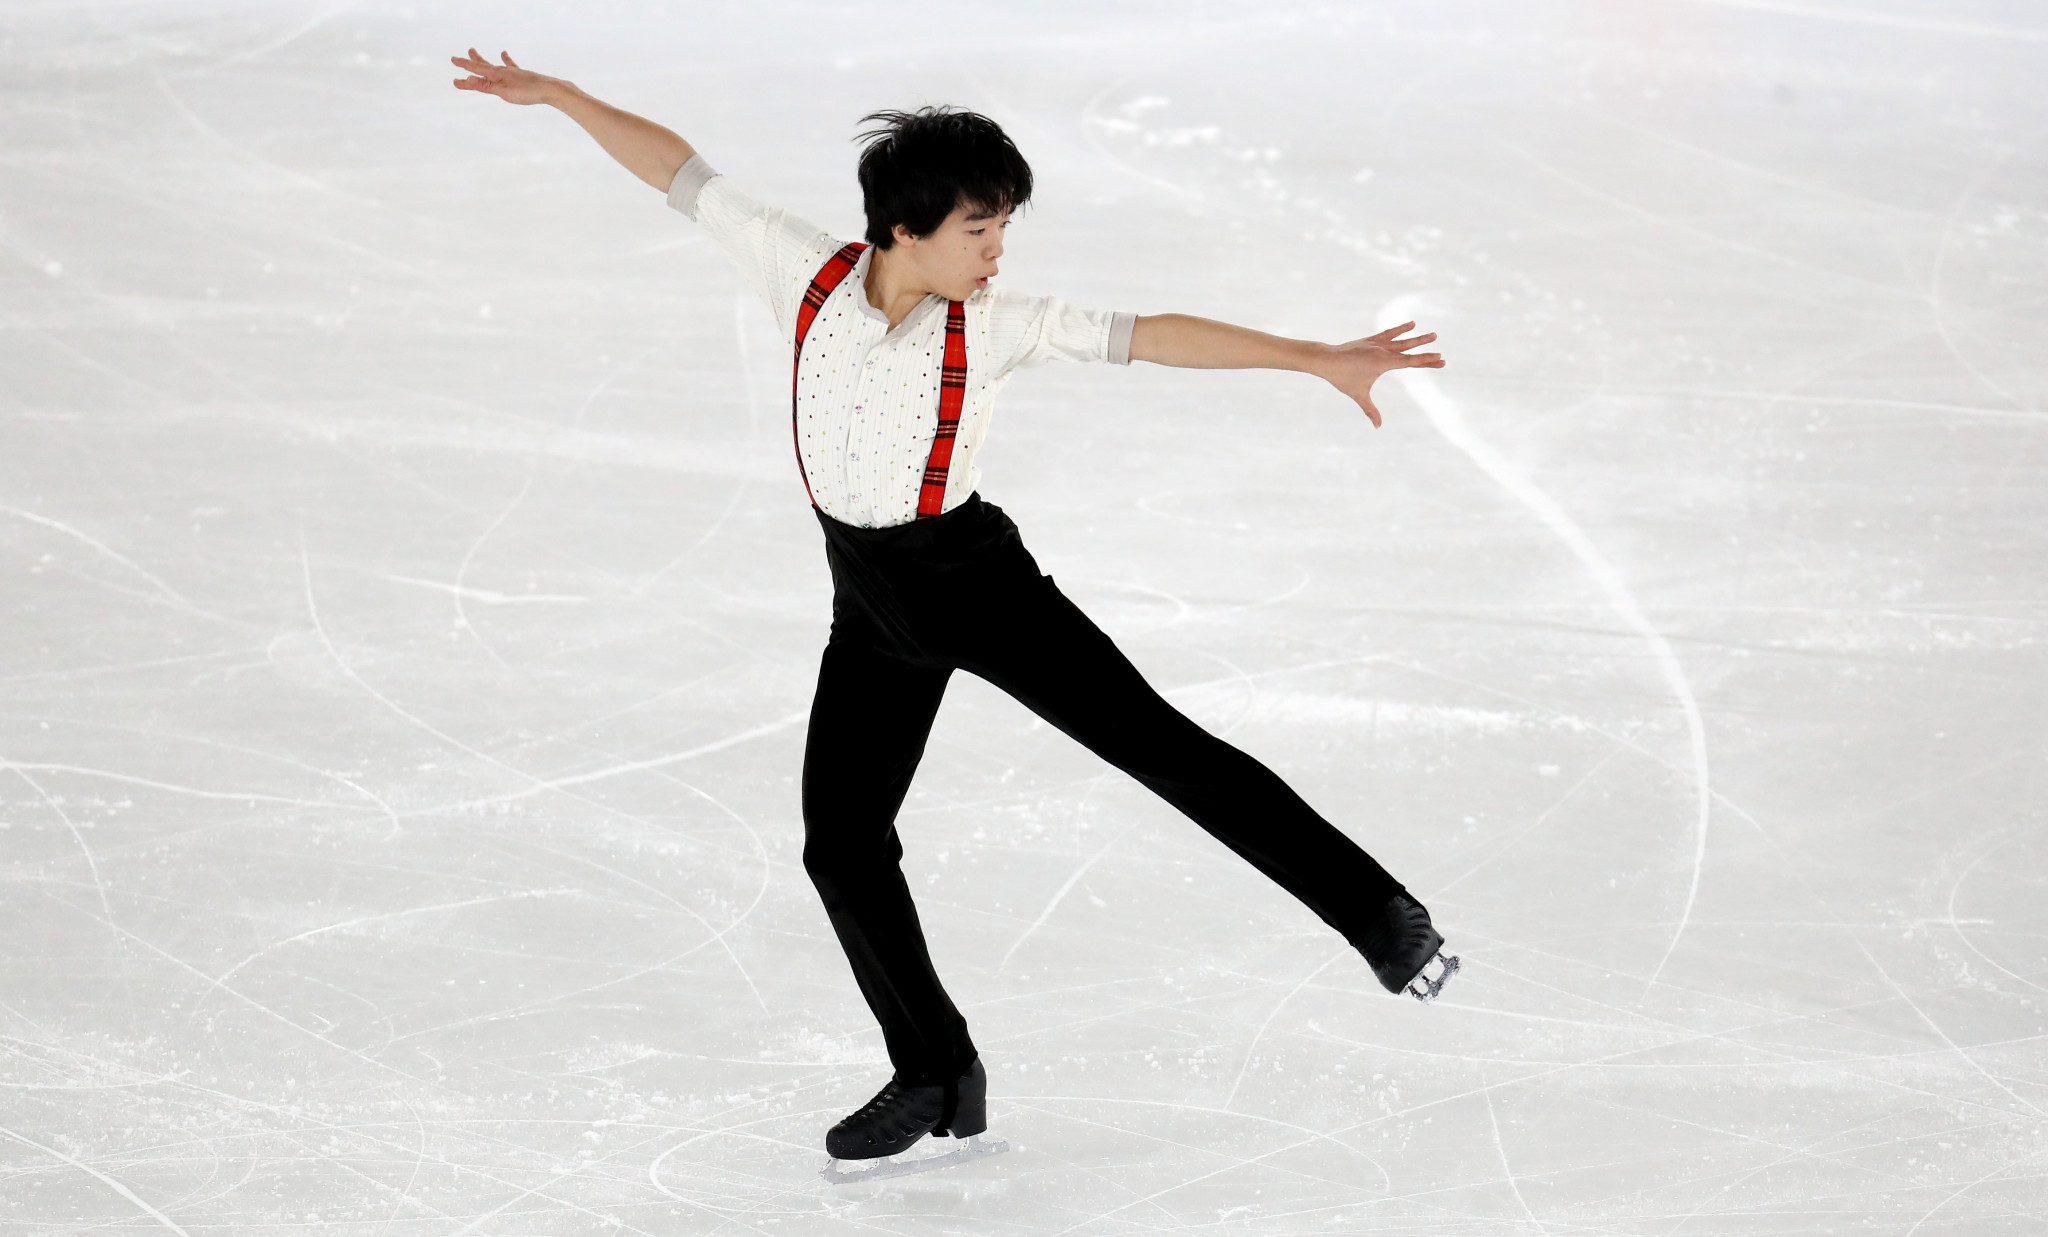 The first figure skating titles of Lausanne 2020 were earned ©Getty Images